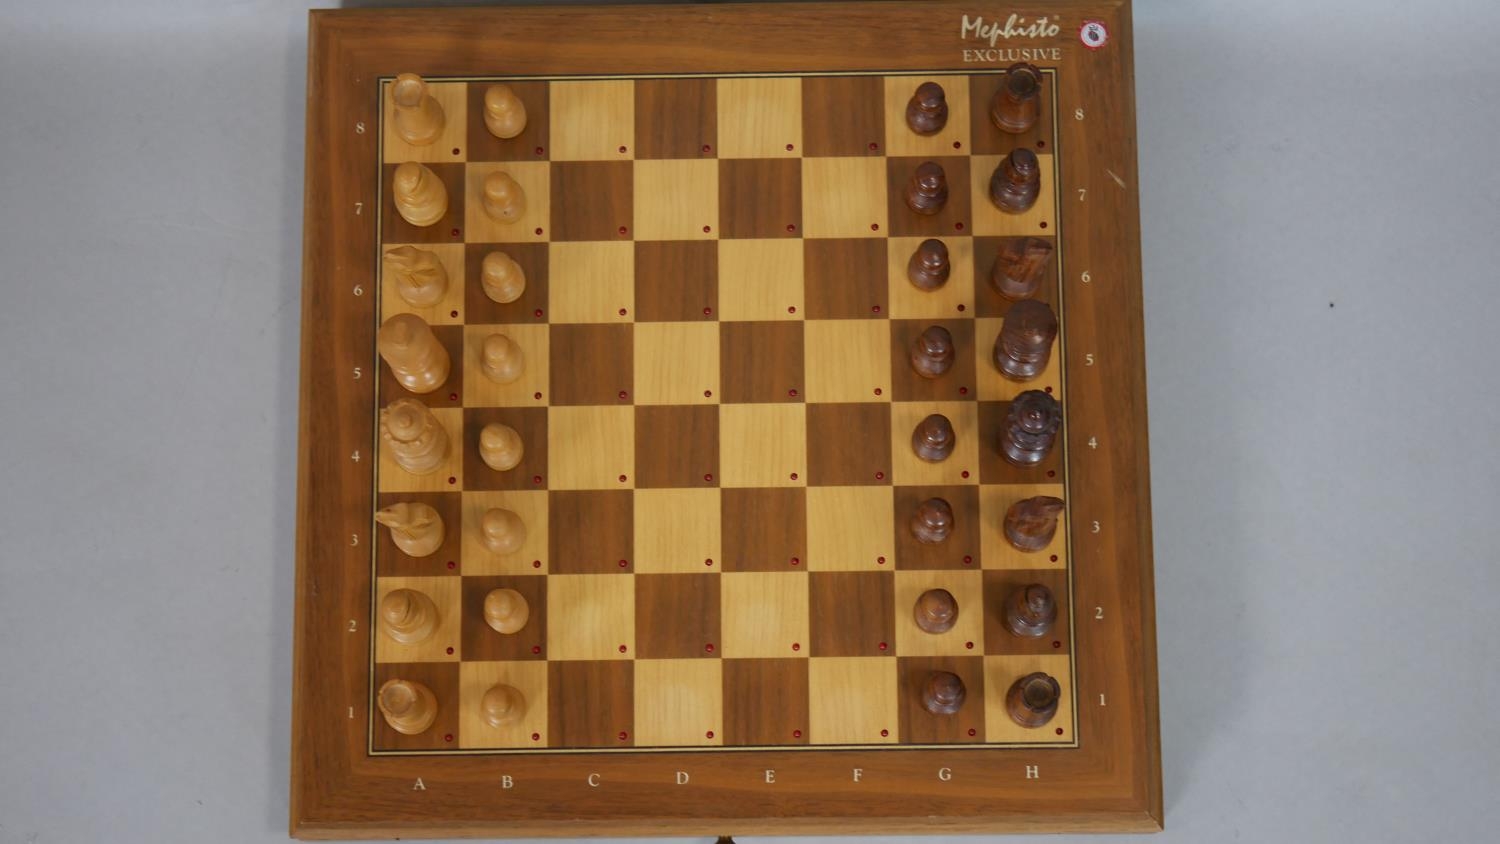 A 1980's Mephisto Exclusive hardwood modular chess board with pieces. (Complete) H.5 L.41 W.40.5cm - Image 5 of 7